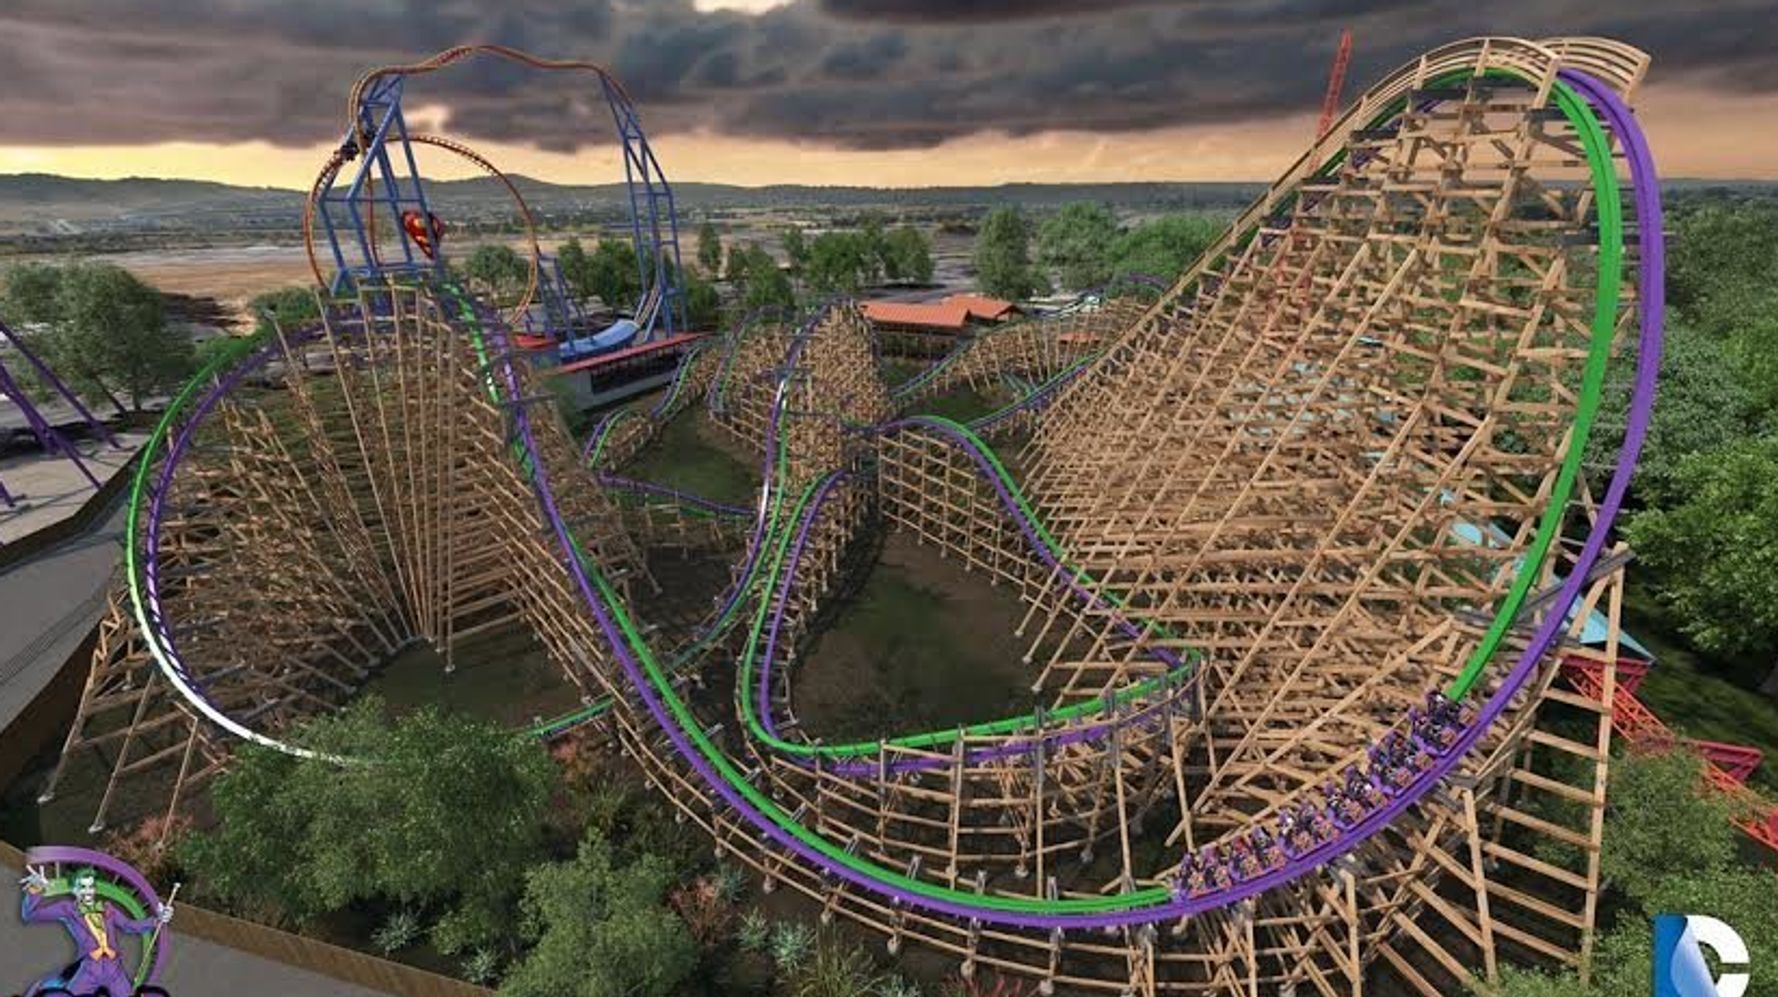 JOKER Coaster at Six Flags: Eight Reasons You'll Love This Ride